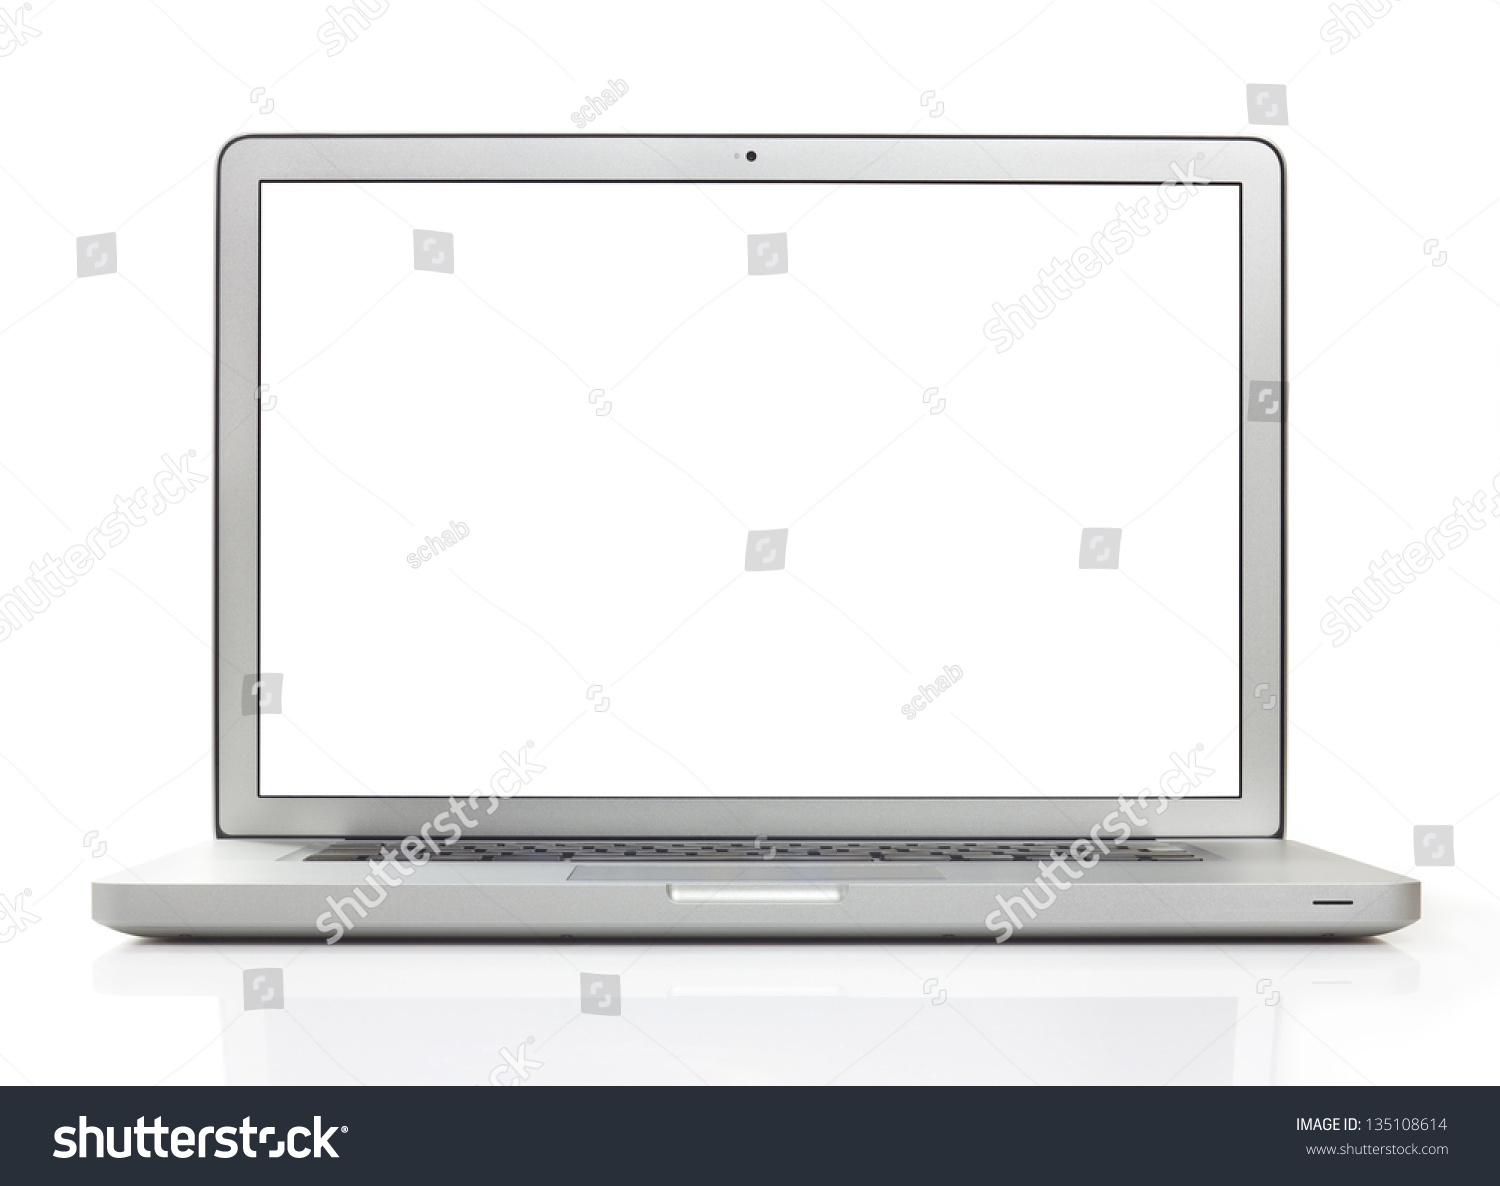 Laptop with 2 clipping paths #135108614